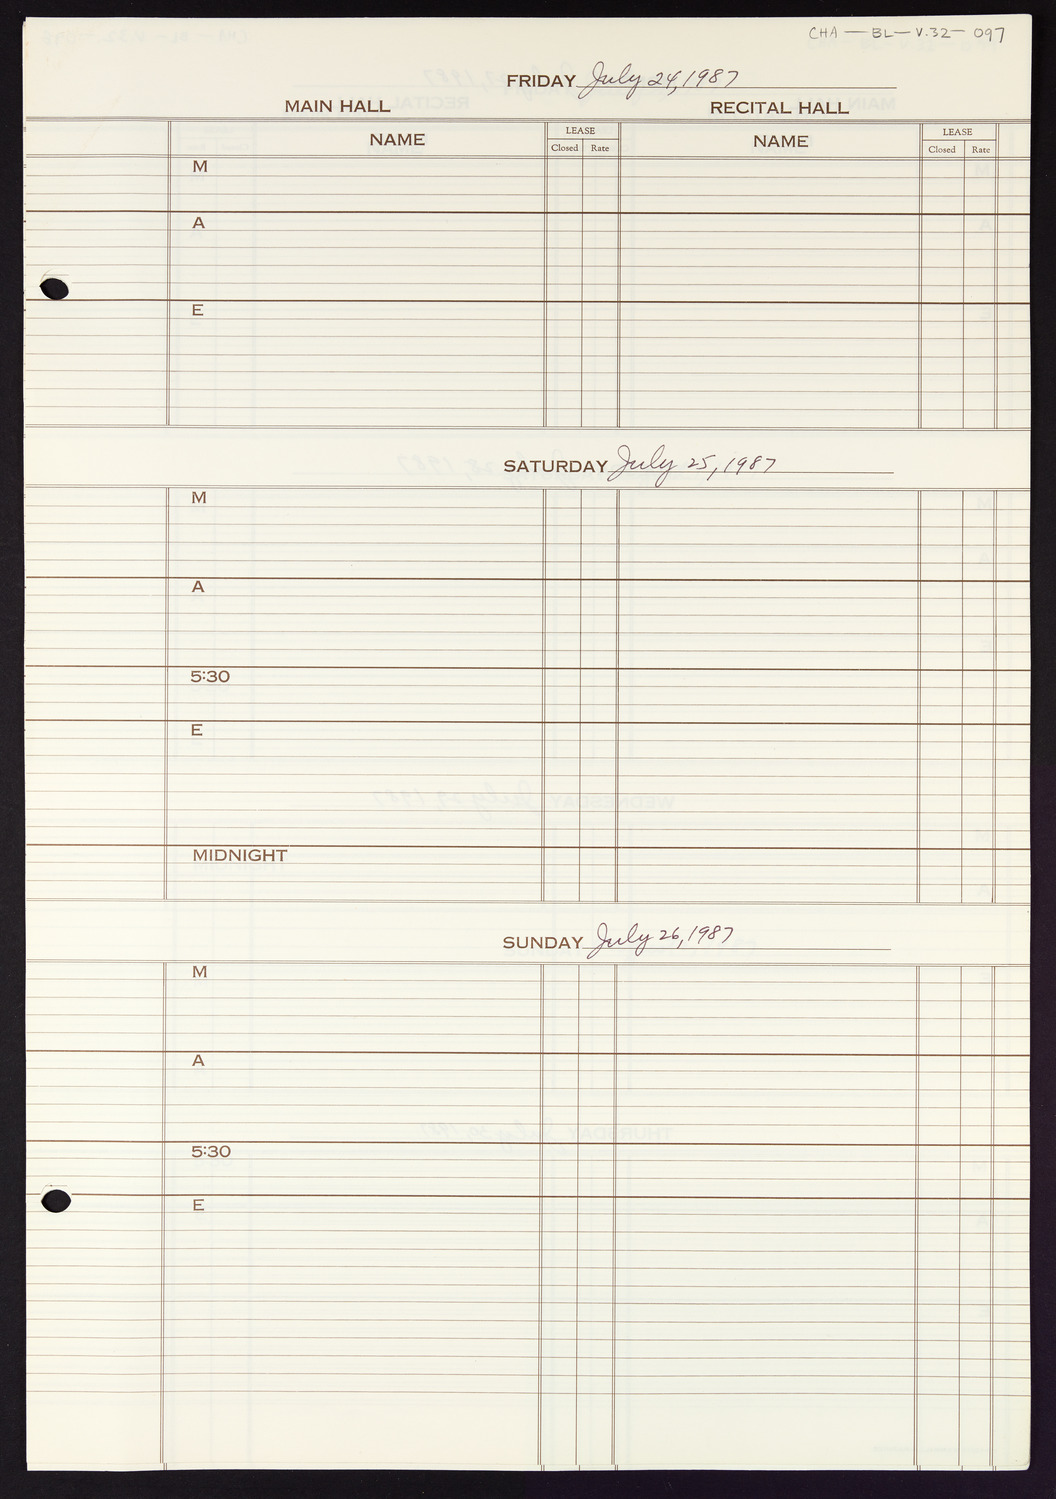 Carnegie Hall Booking Ledger, volume 32, page 97